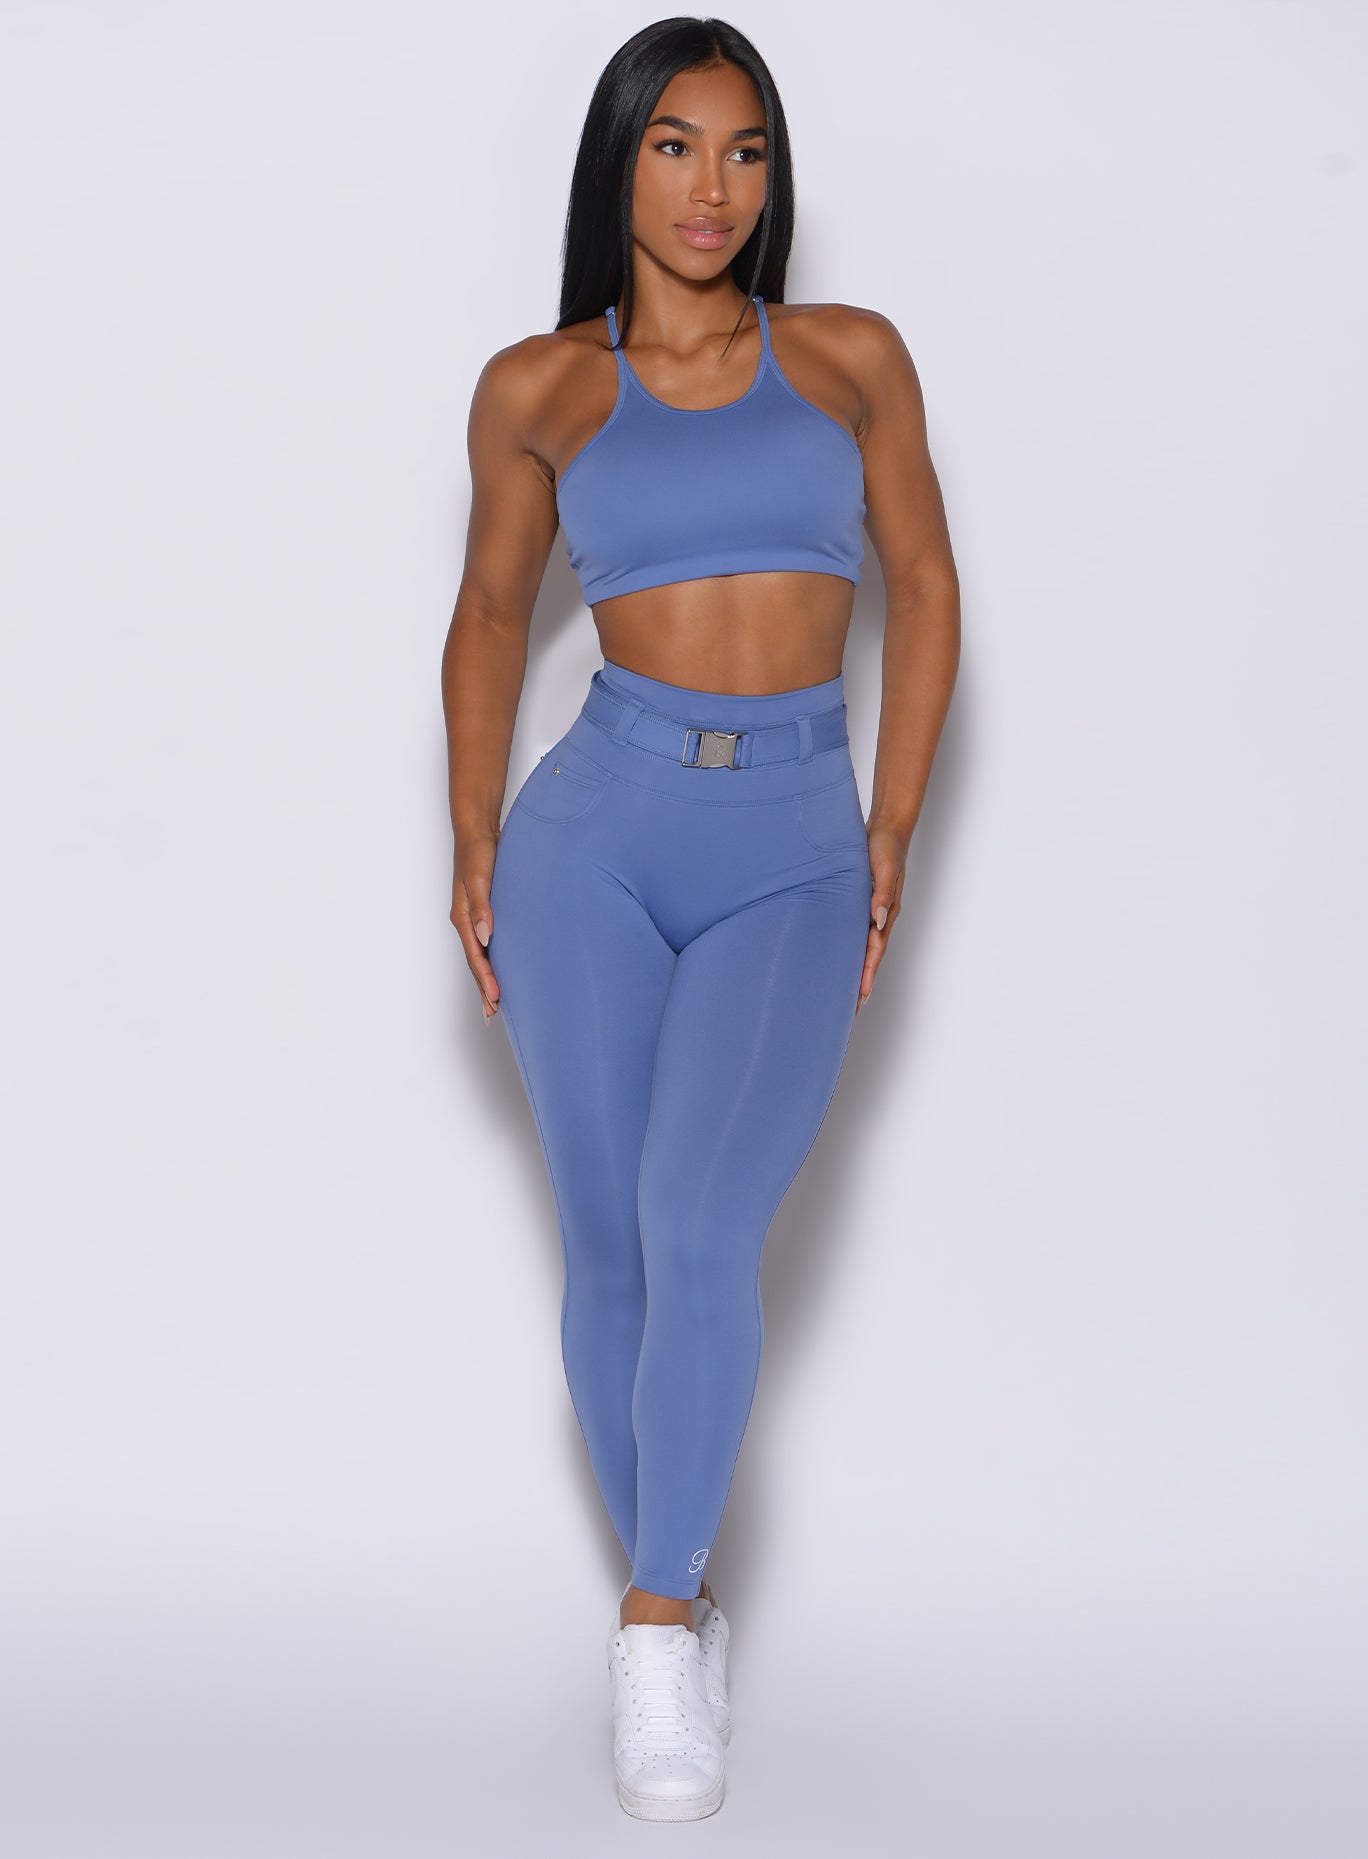 front  profile view of a model wearing our peach bottoms leggings in denim blue color along with the matching sports bra